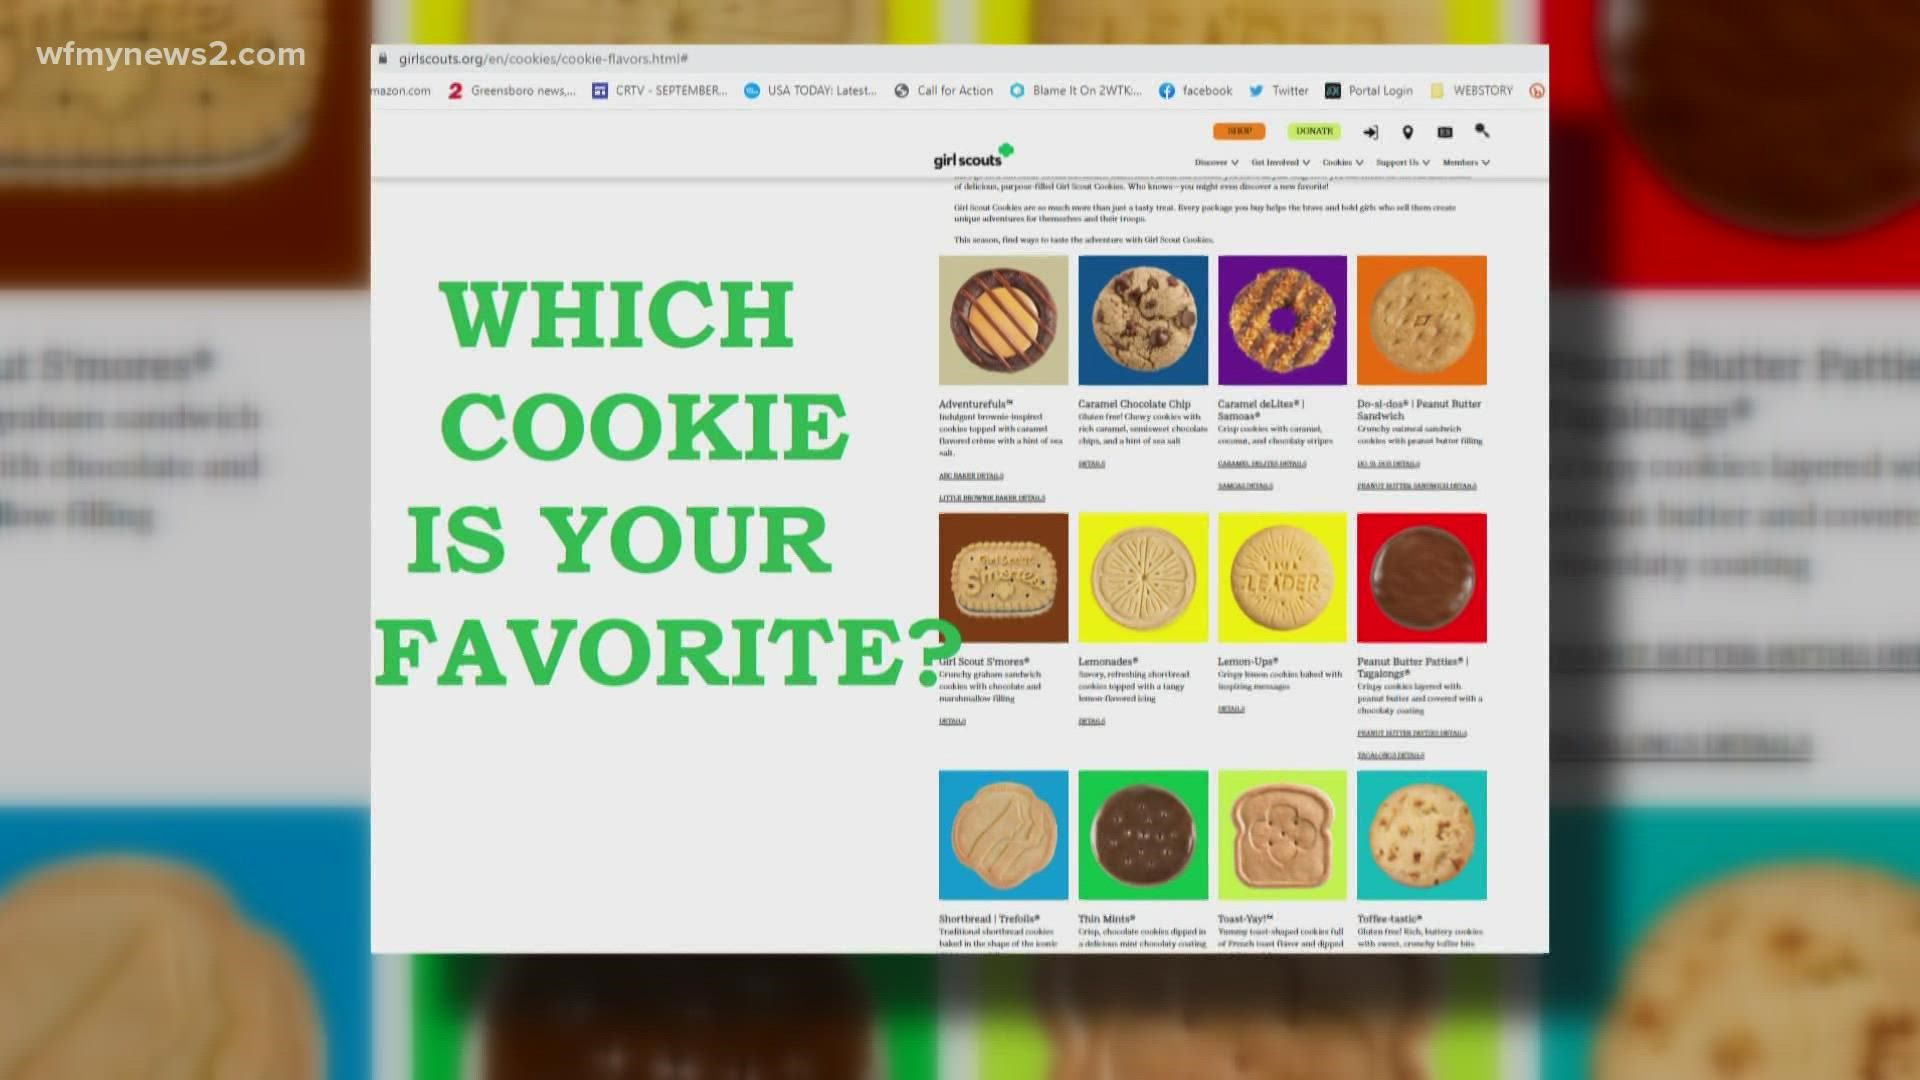 With a new cookie season just hours away, the Girl Scouts organization is putting its best foot forward with a new cookie debut.